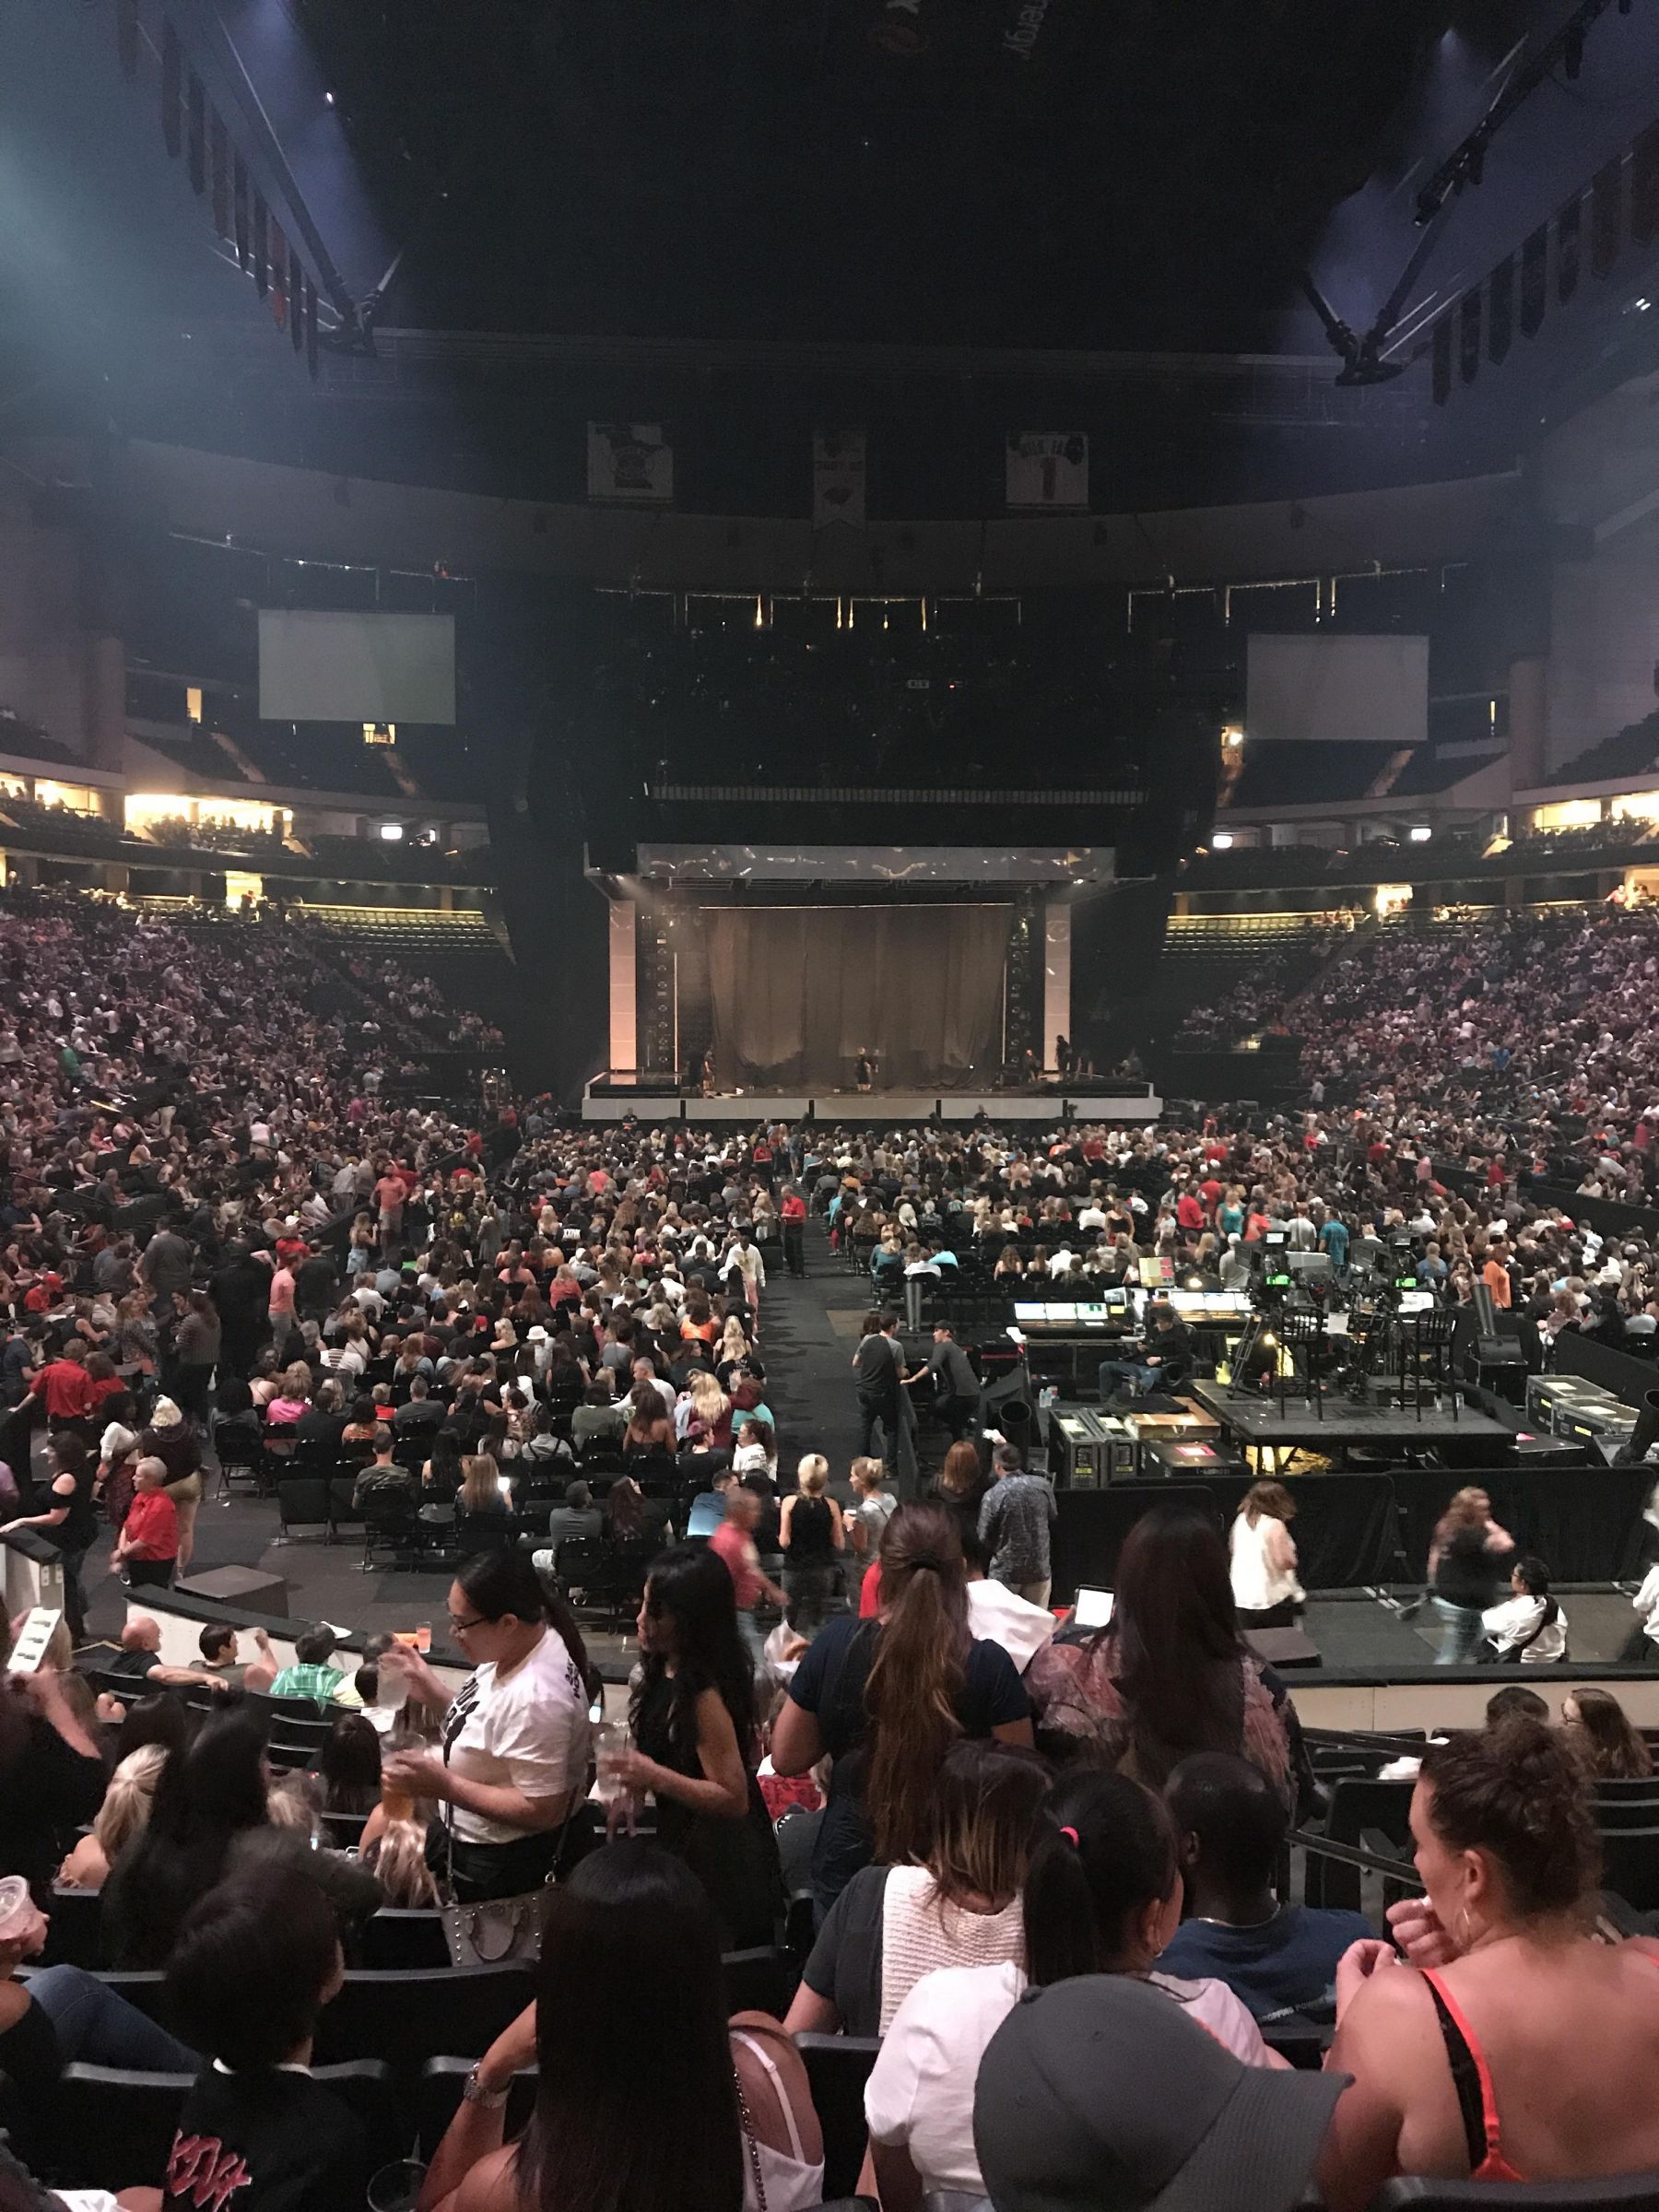 Good Seat at a good level with the stage : Xcel Energy Center Section